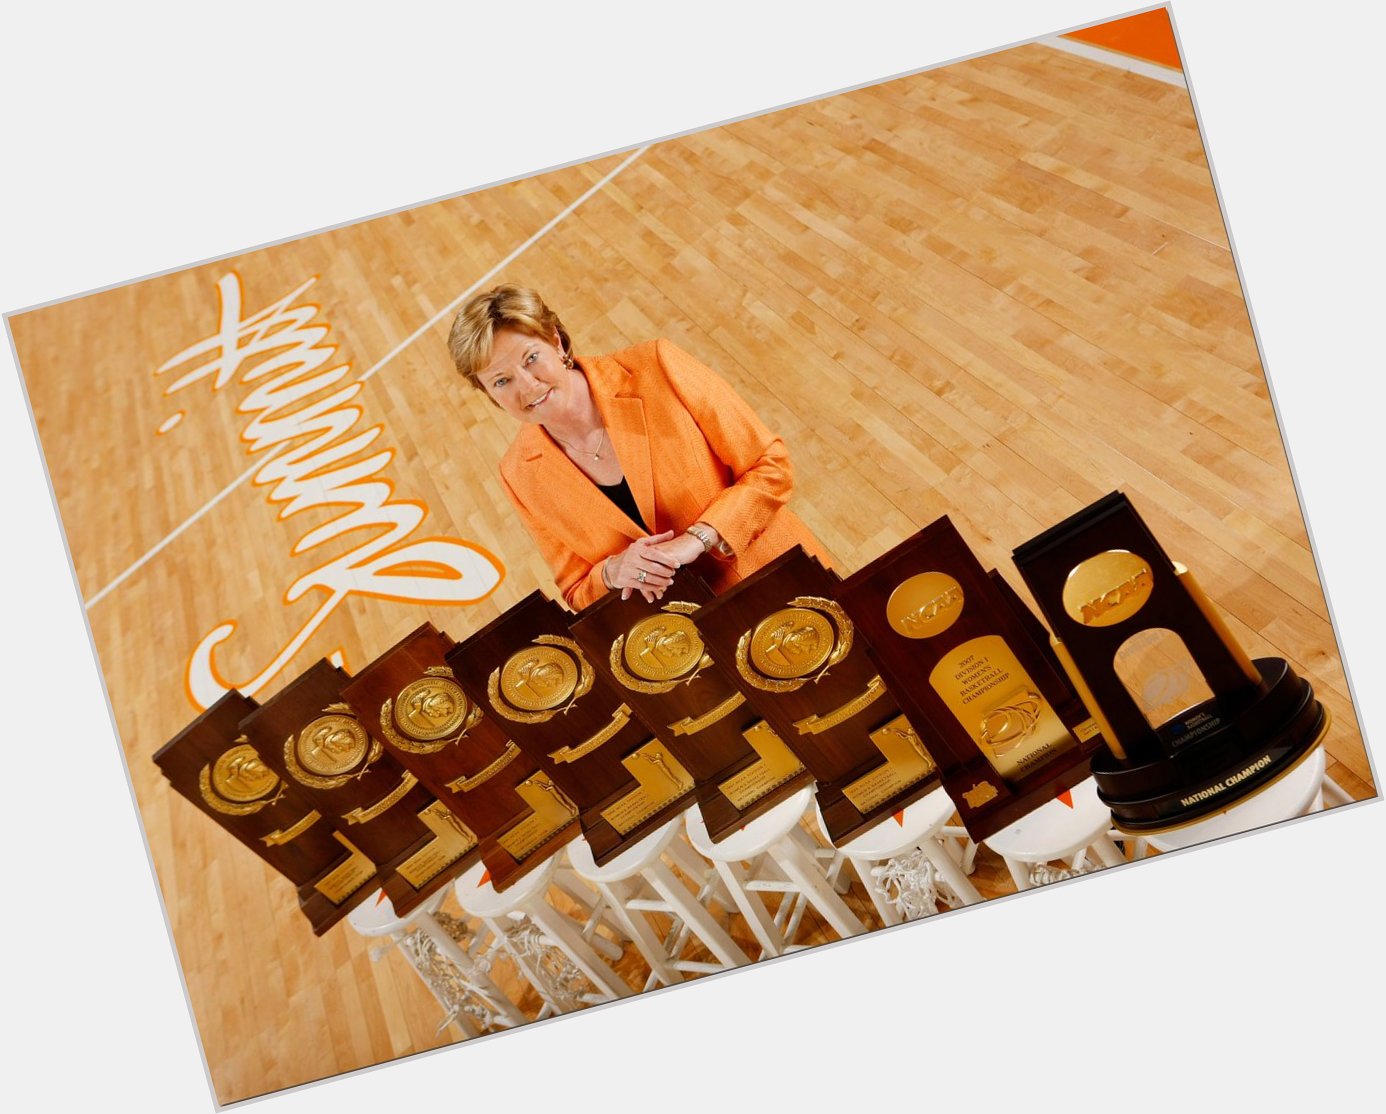 Happy Heavenly Bday to the woman, the legend, the icon, the greatest ever Pat Summitt        